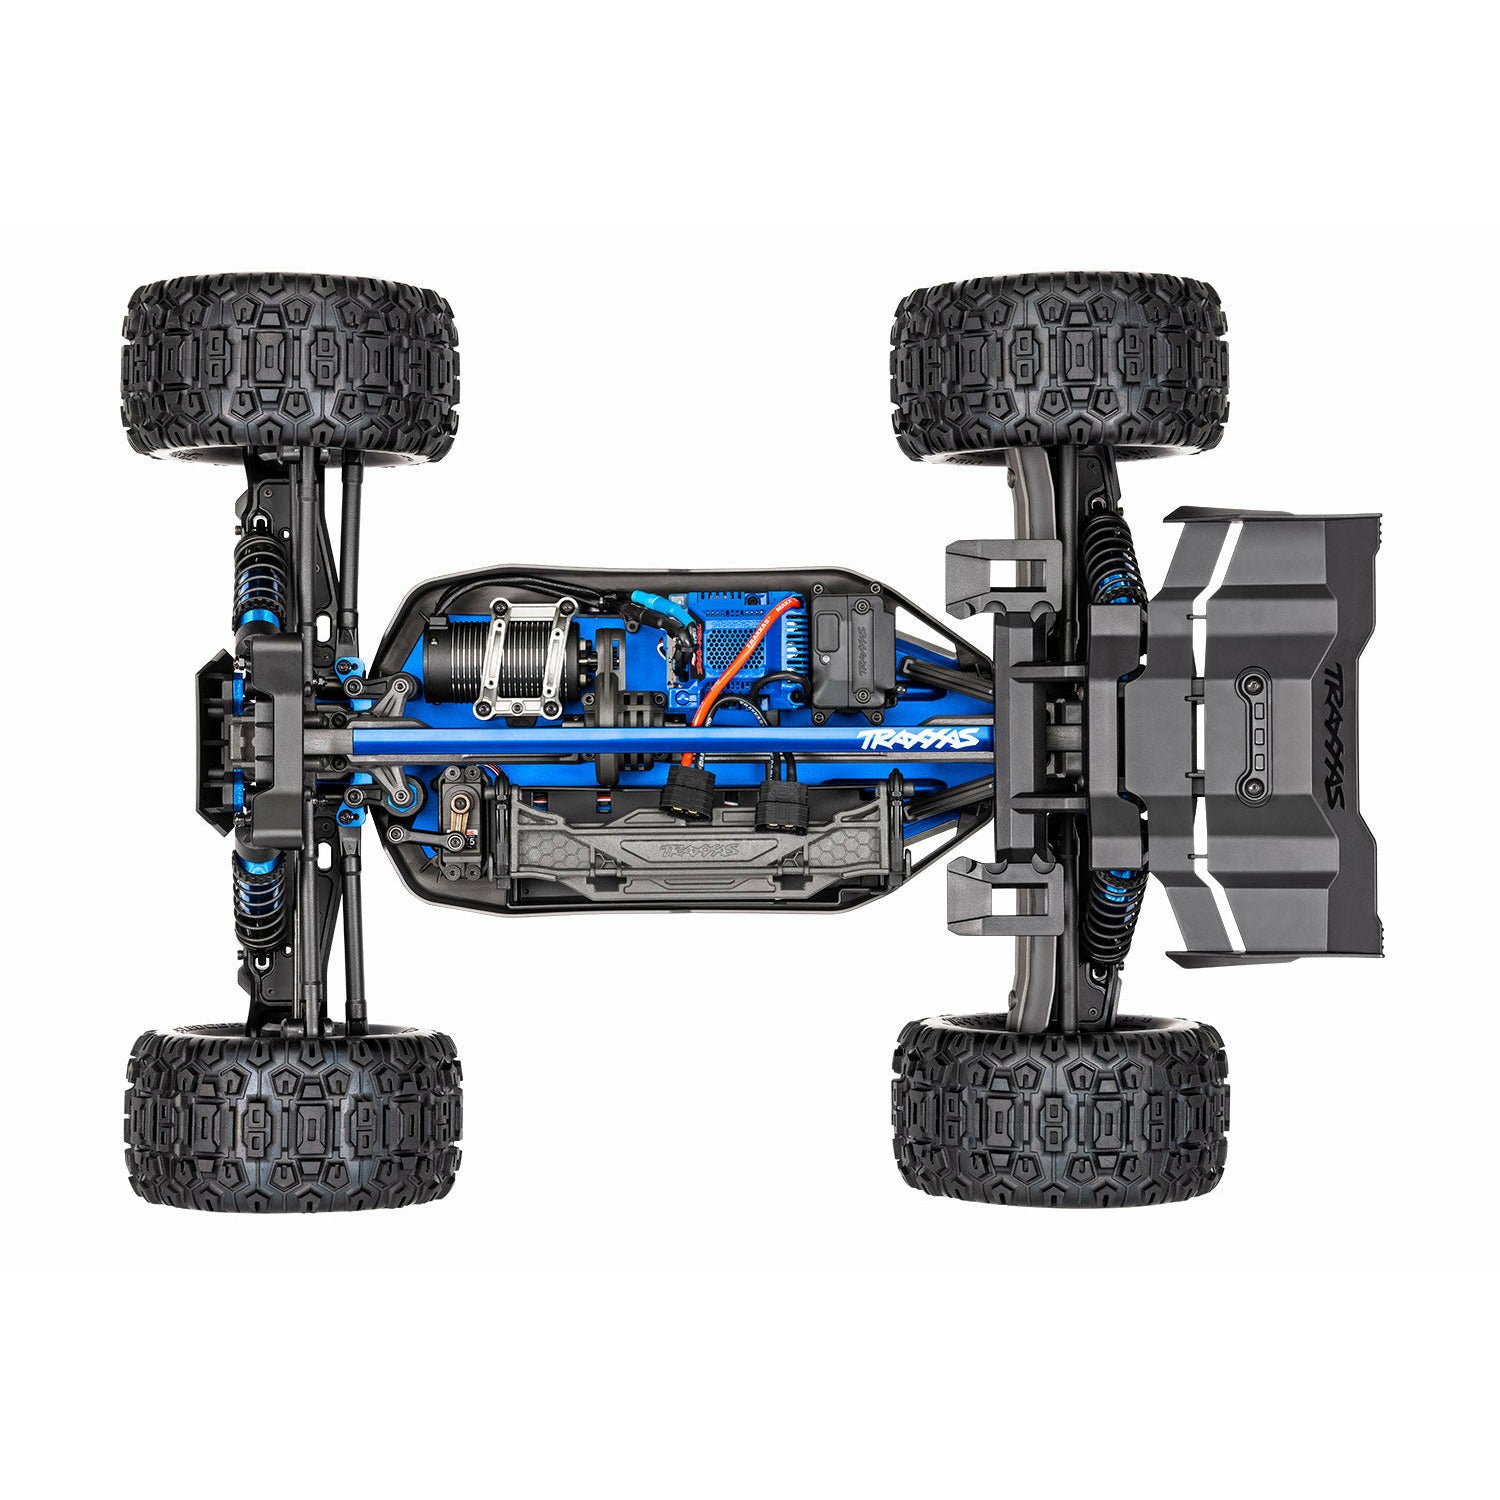 TRAXXAS Sledge Belted 1/8 Scale 4WD Brushless Electric Monster Truck - Green